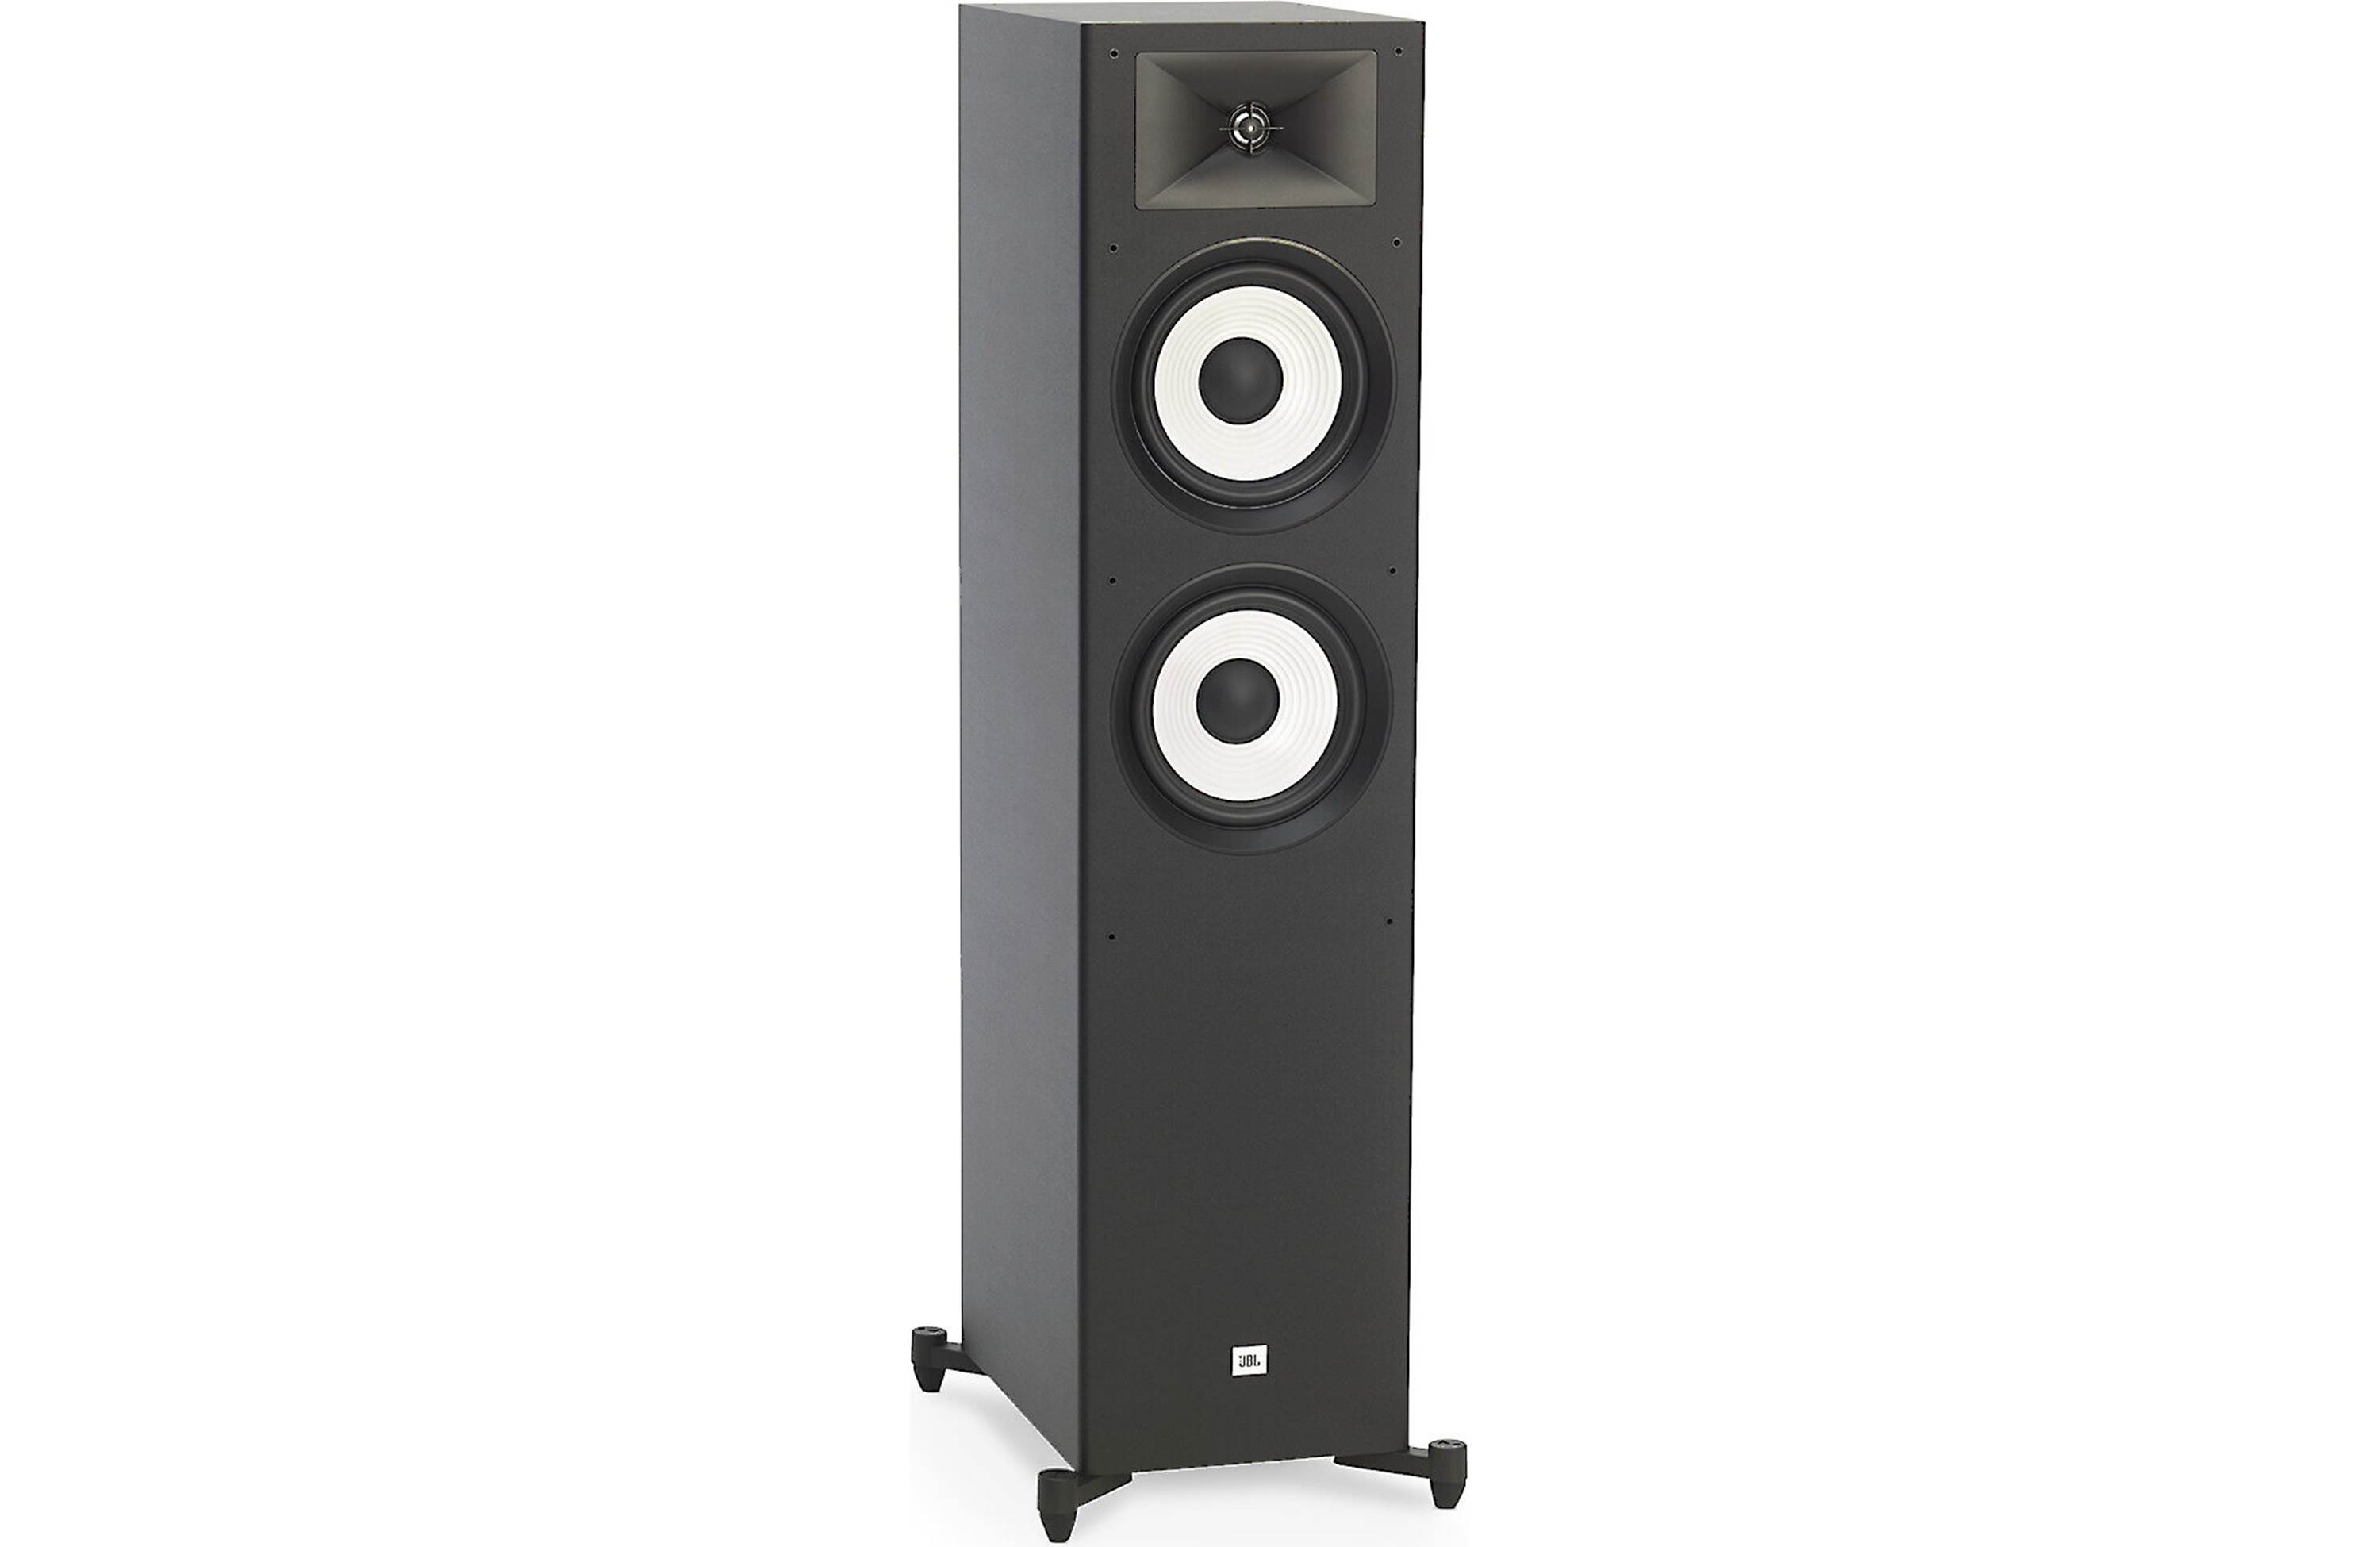 JBL Stage Series Home Theatre Speakers - Stage A180: $239.95, Stage A190: